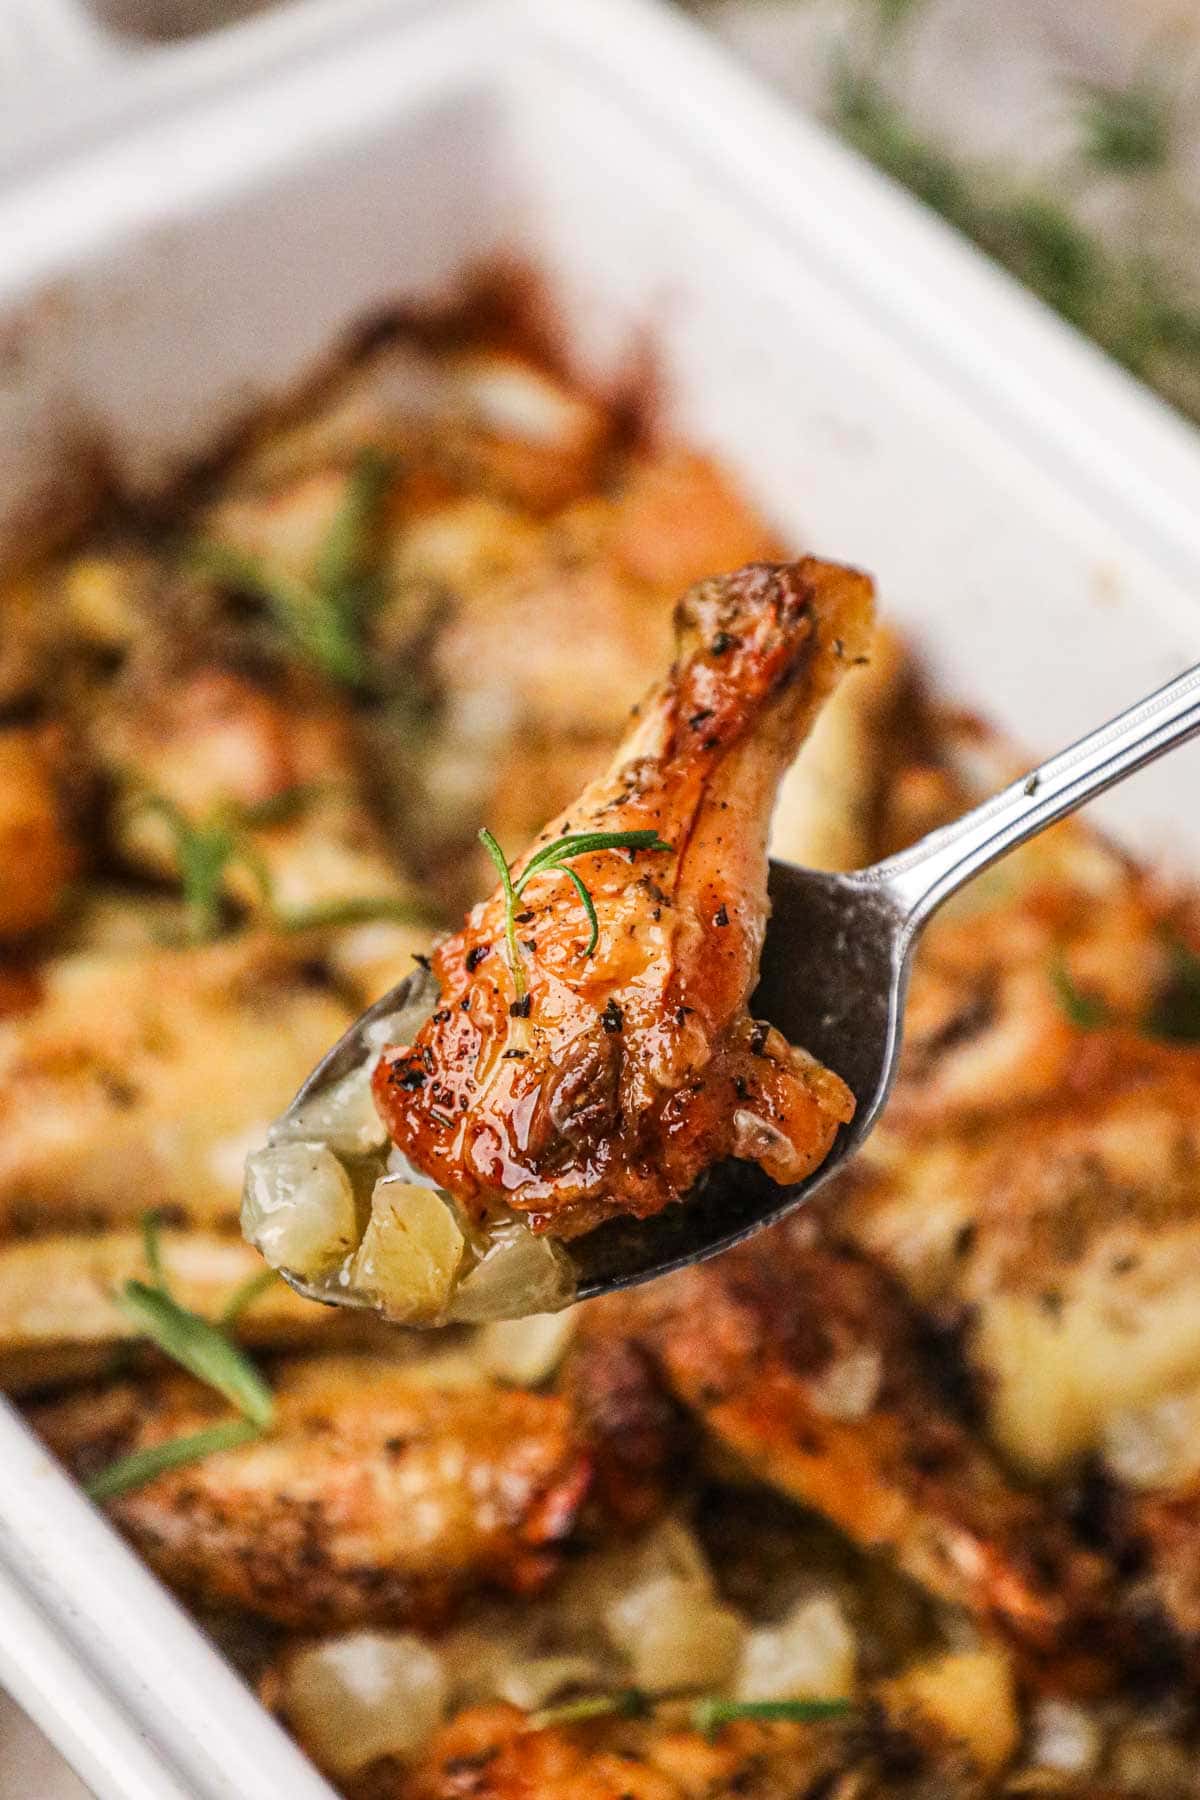 Spoon scooping up an Italian chicken wing and softened onions, bathed in a mixture of fresh rosemary, olive oil, and dry white wine.